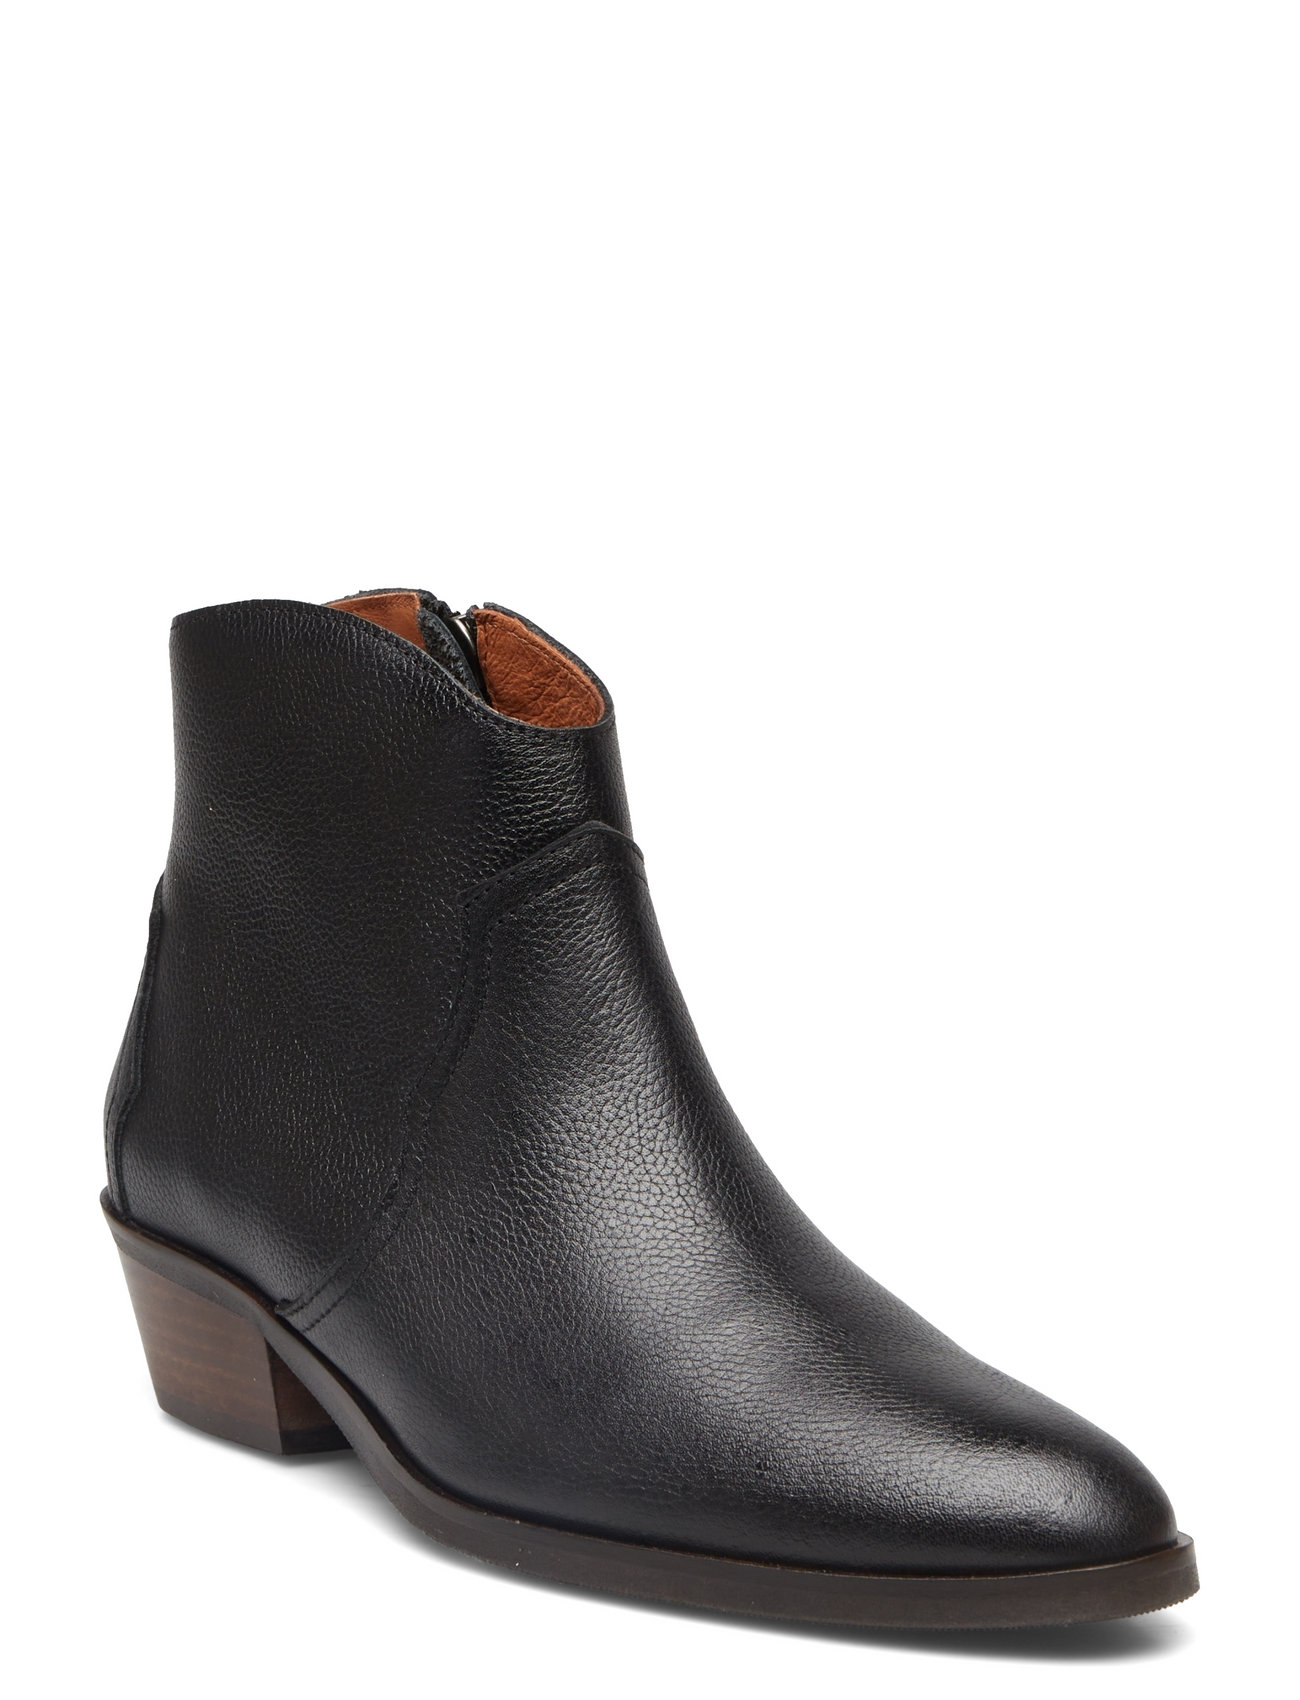 "Anonymous Copenhagen" "Fiona 35 Shoes Boots Ankle With Heel Black Anonymous